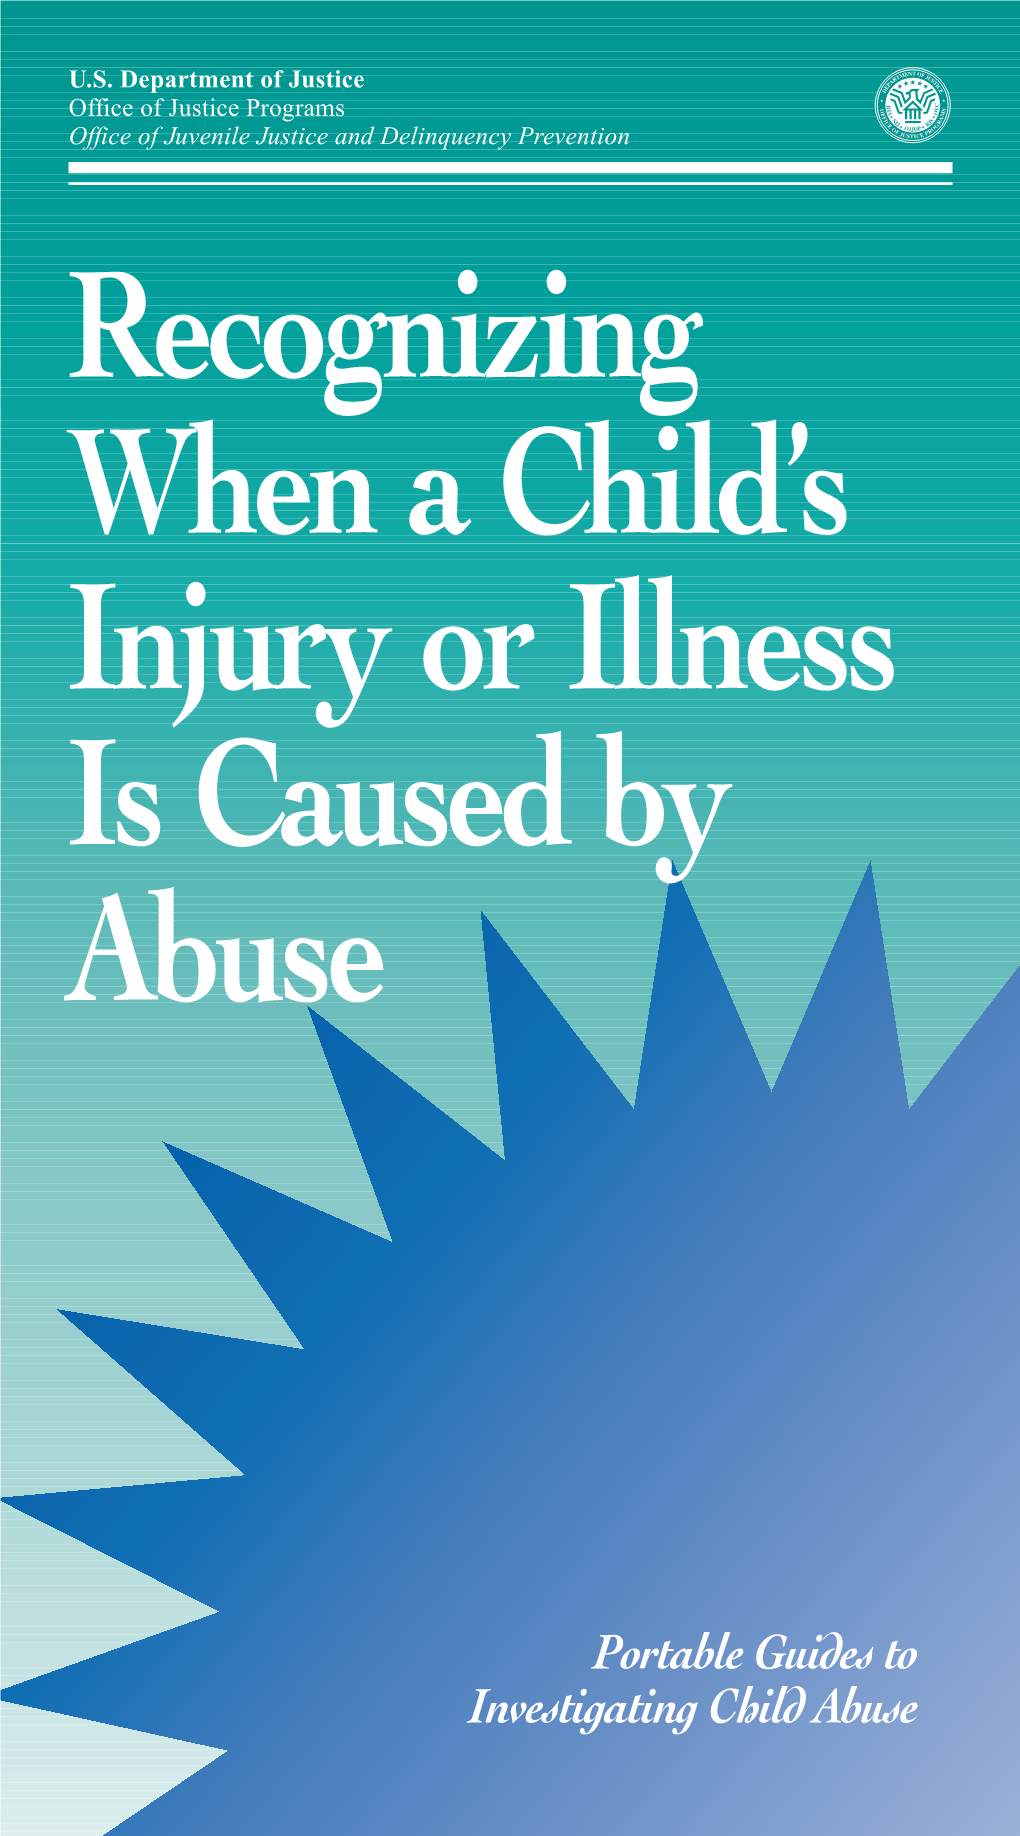 Recognizing When a Child's Injury Or Illness Is Caused by Abuse